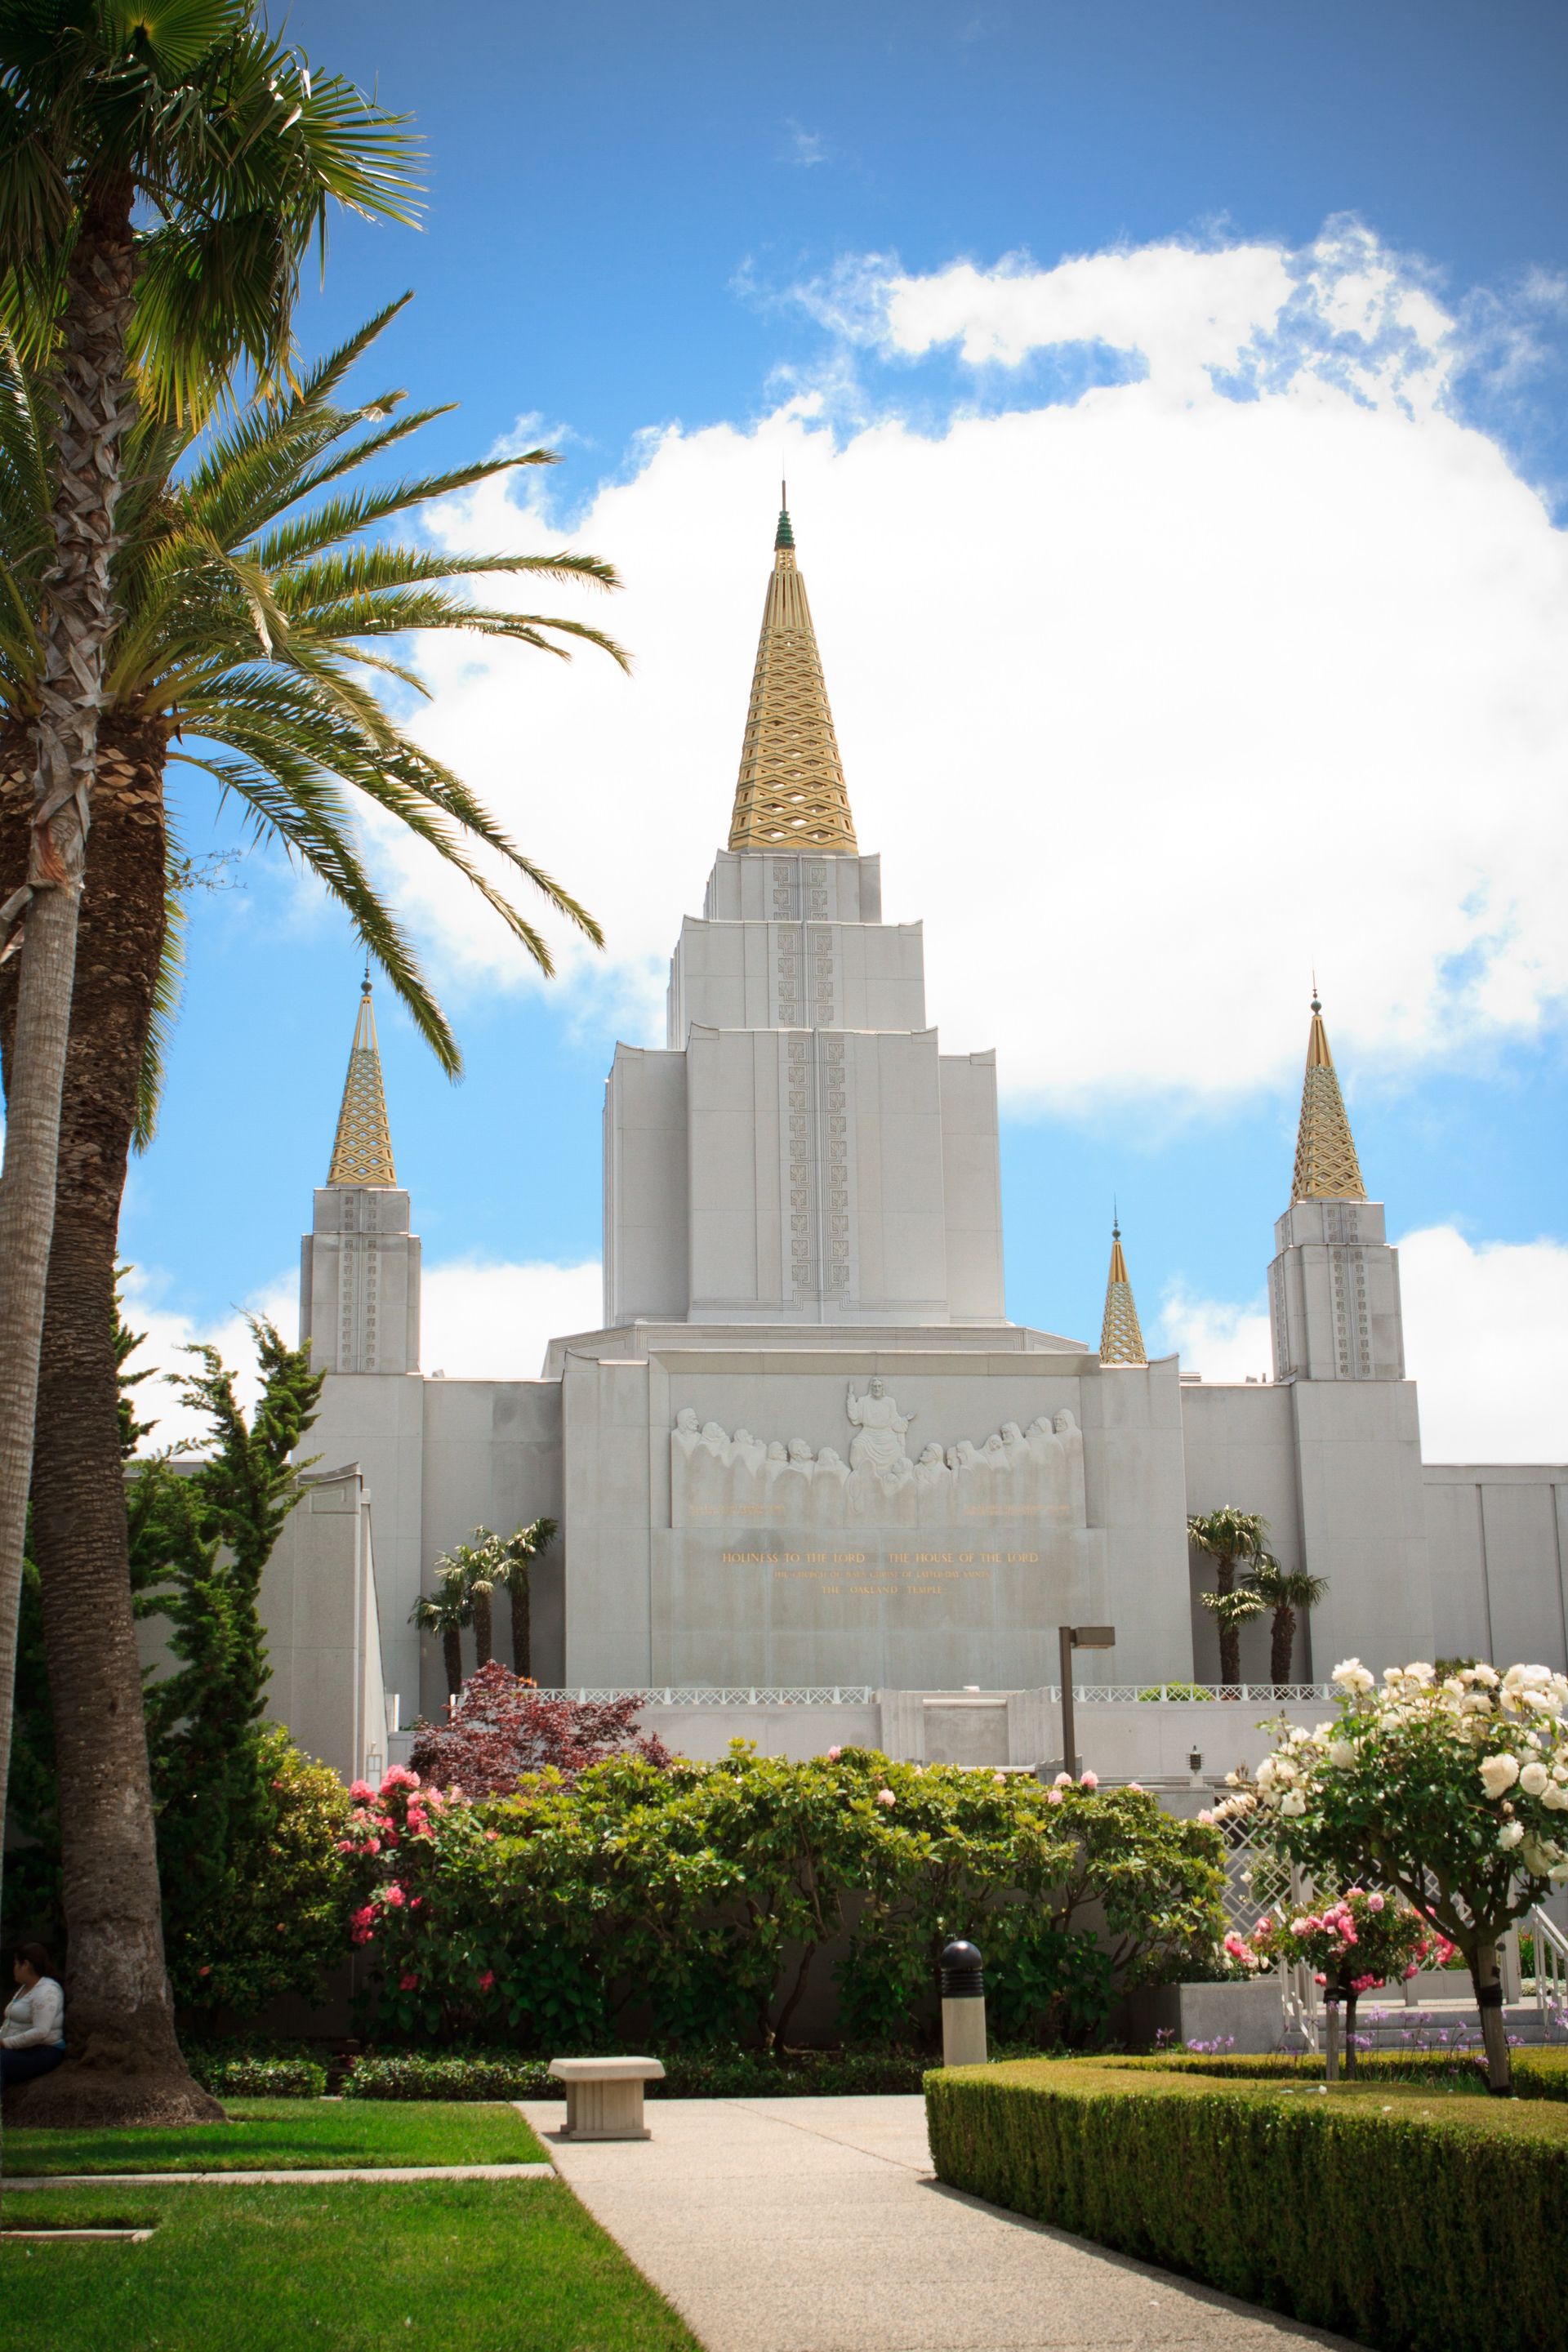 The Oakland California Temple, including scenery.